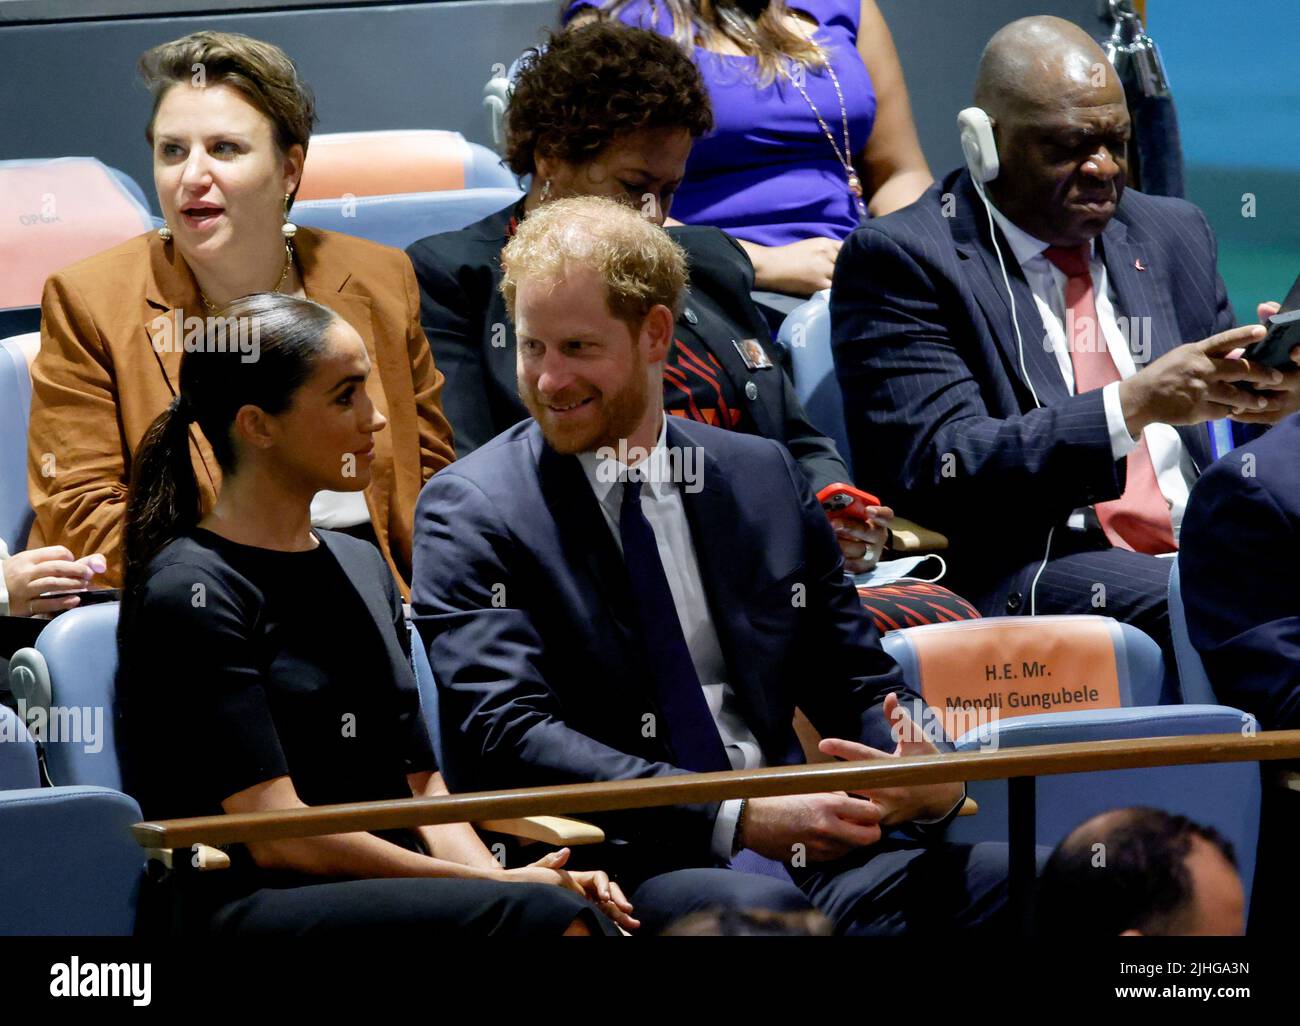 Britain's Prince Harry and his wife Meghan, Duchess of Sussex, attend the United Nations General Assembly celebration of Nelson Mandela International Day at the United Nations Headquarters in New York, U.S., July 18, 2022. REUTERS/Eduardo Munoz Stock Photo